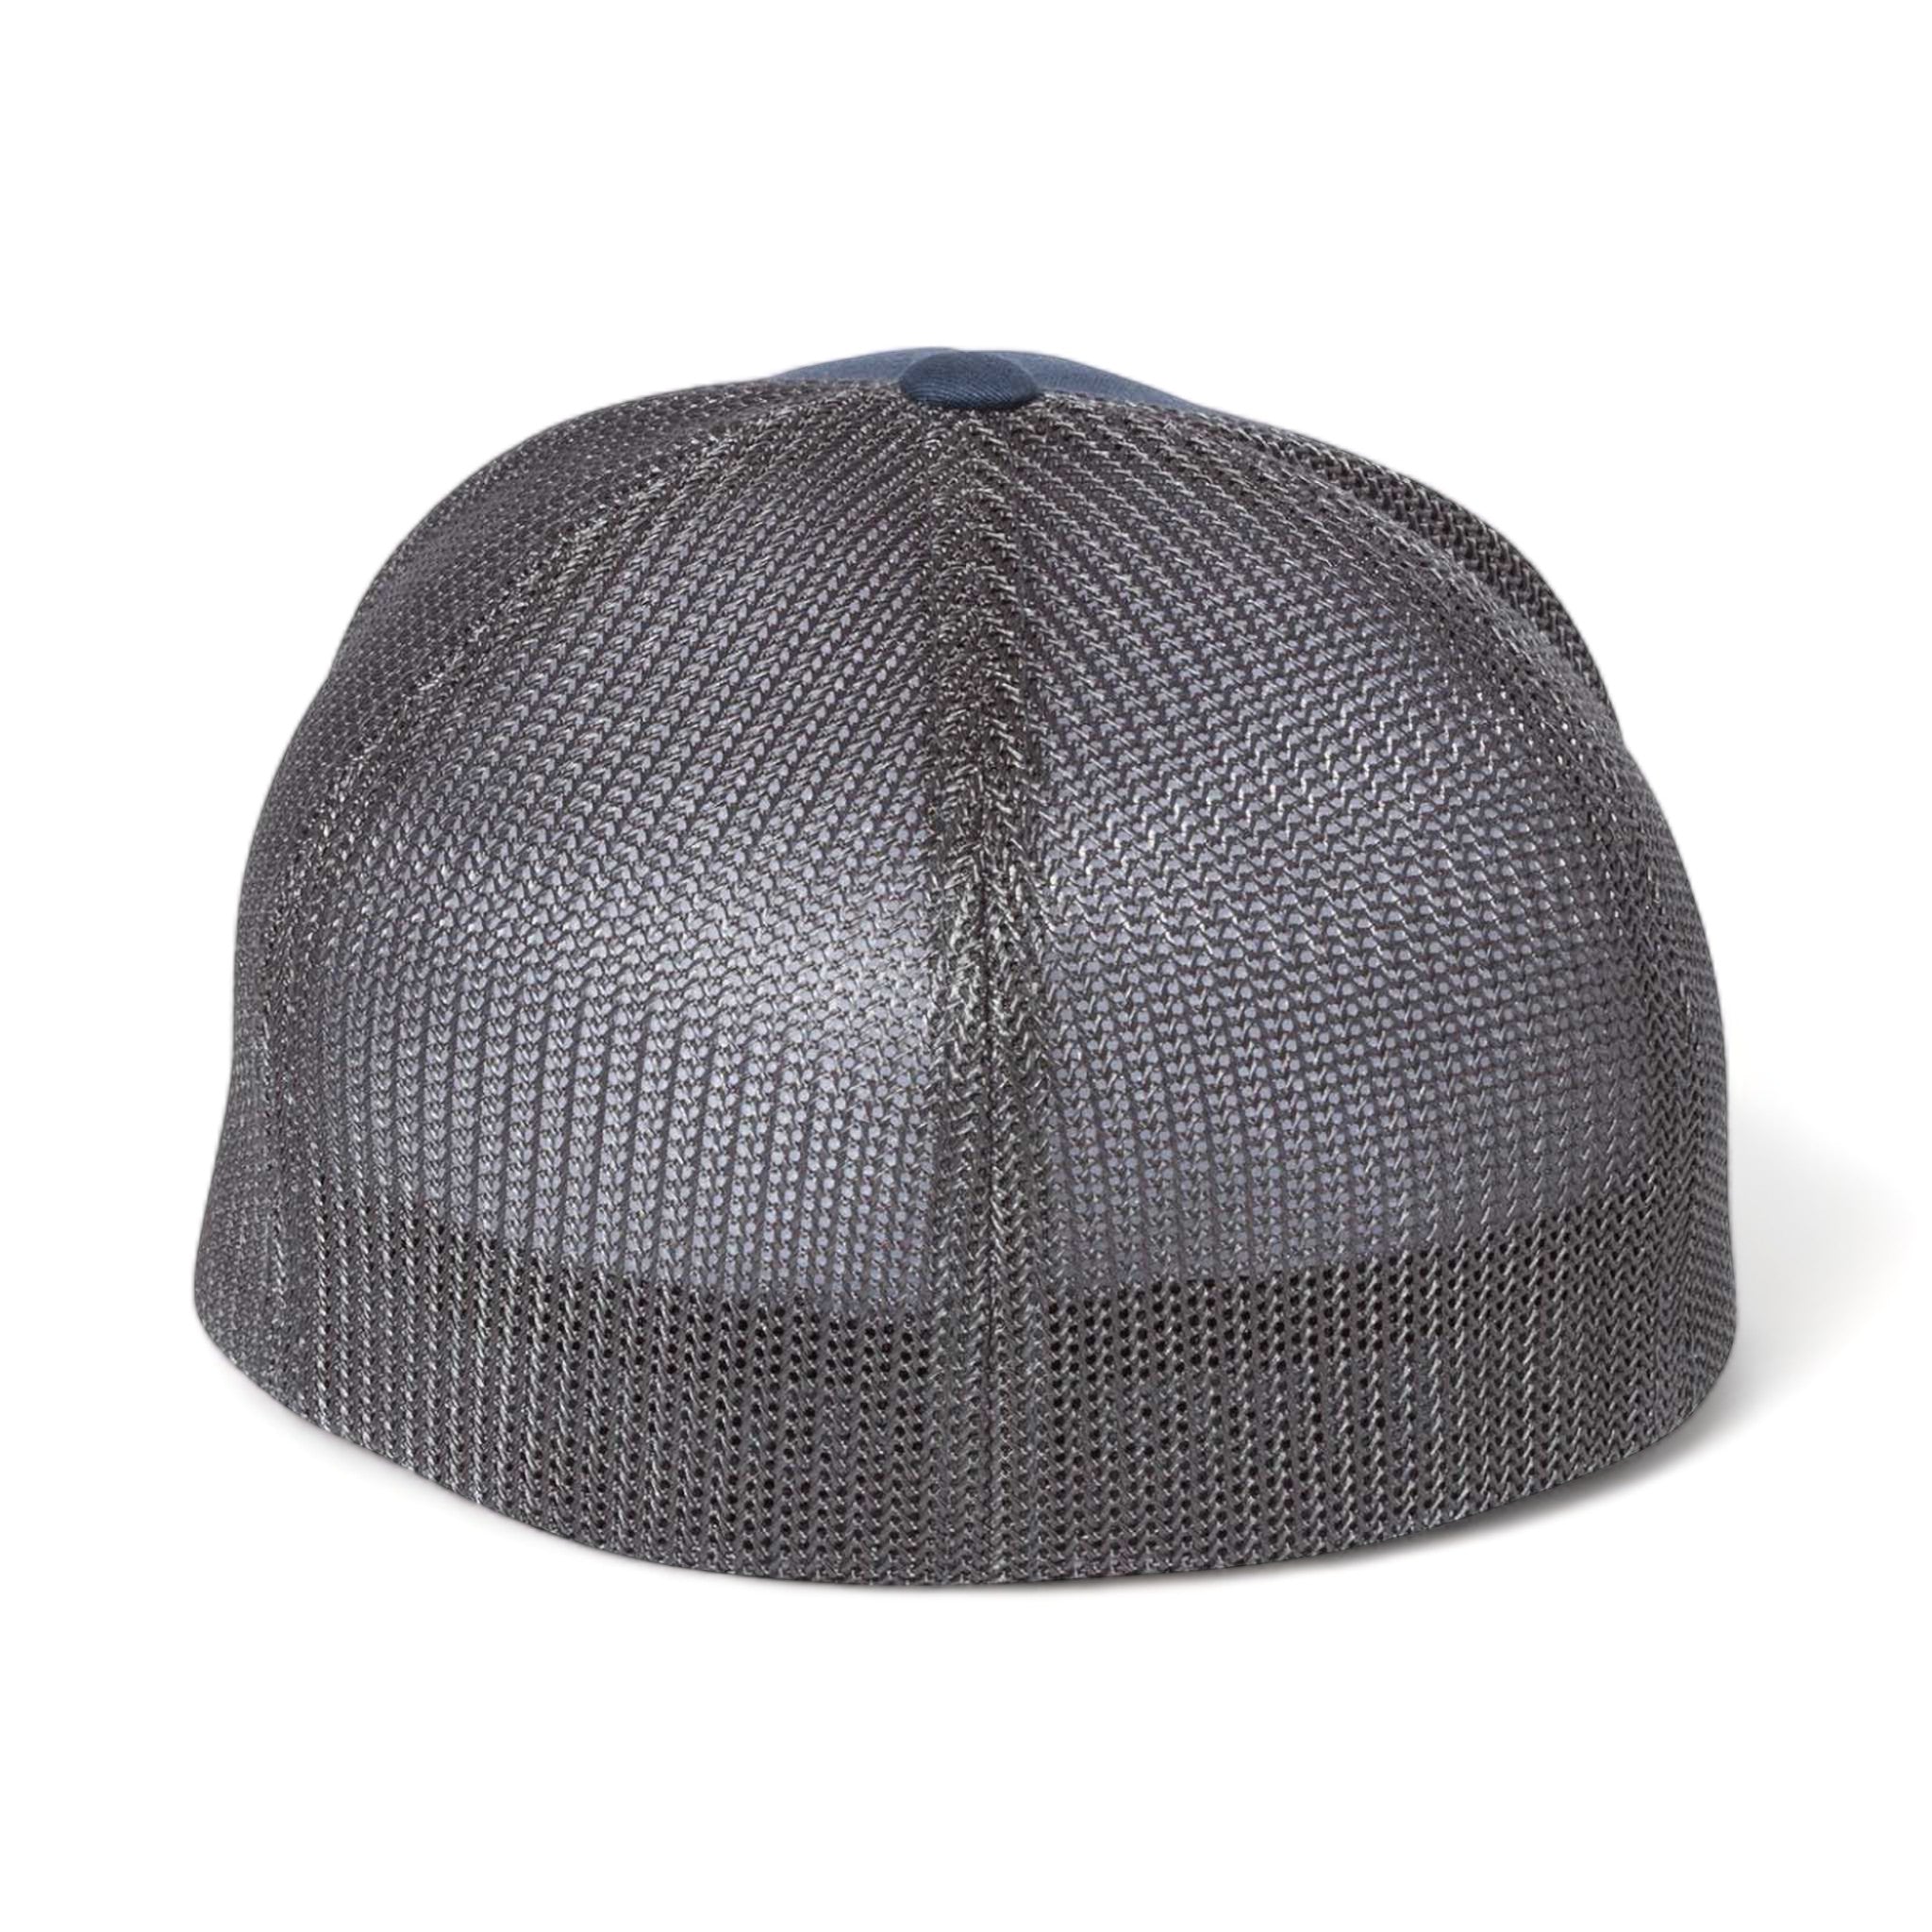 Back view of Flexfit 6511 custom hat in navy and graphite